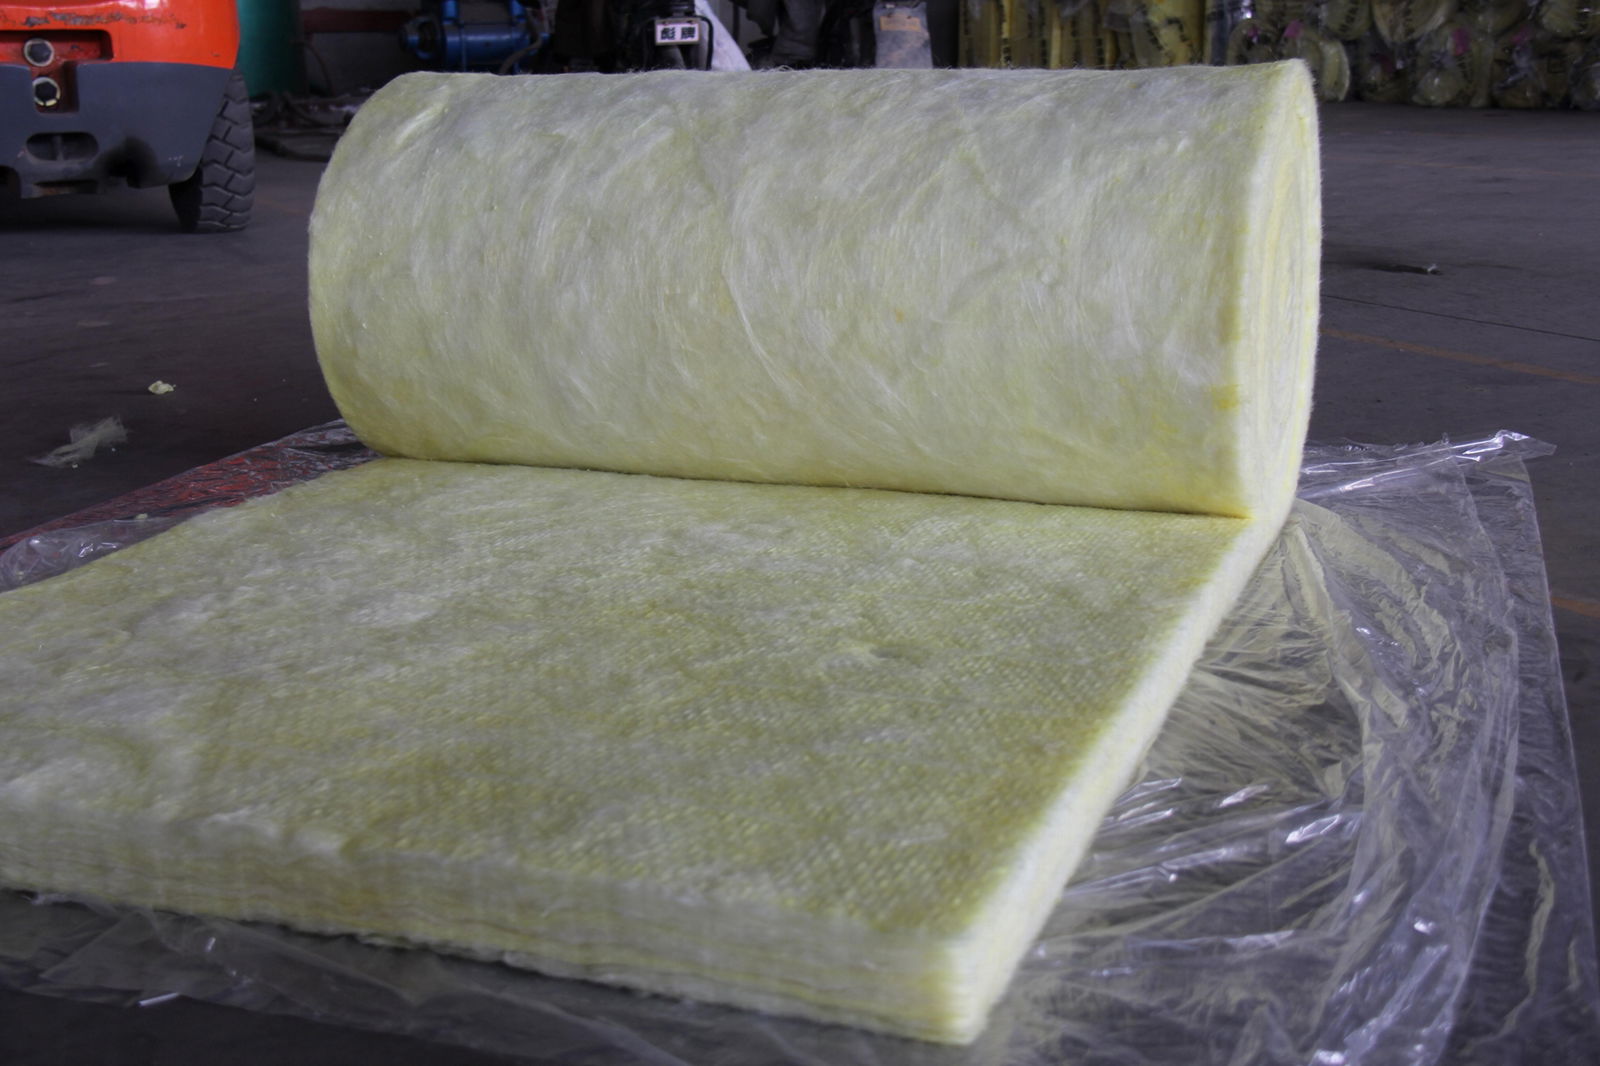  ultra-low discount loft insulation glass wool acoustic property for ceilings 